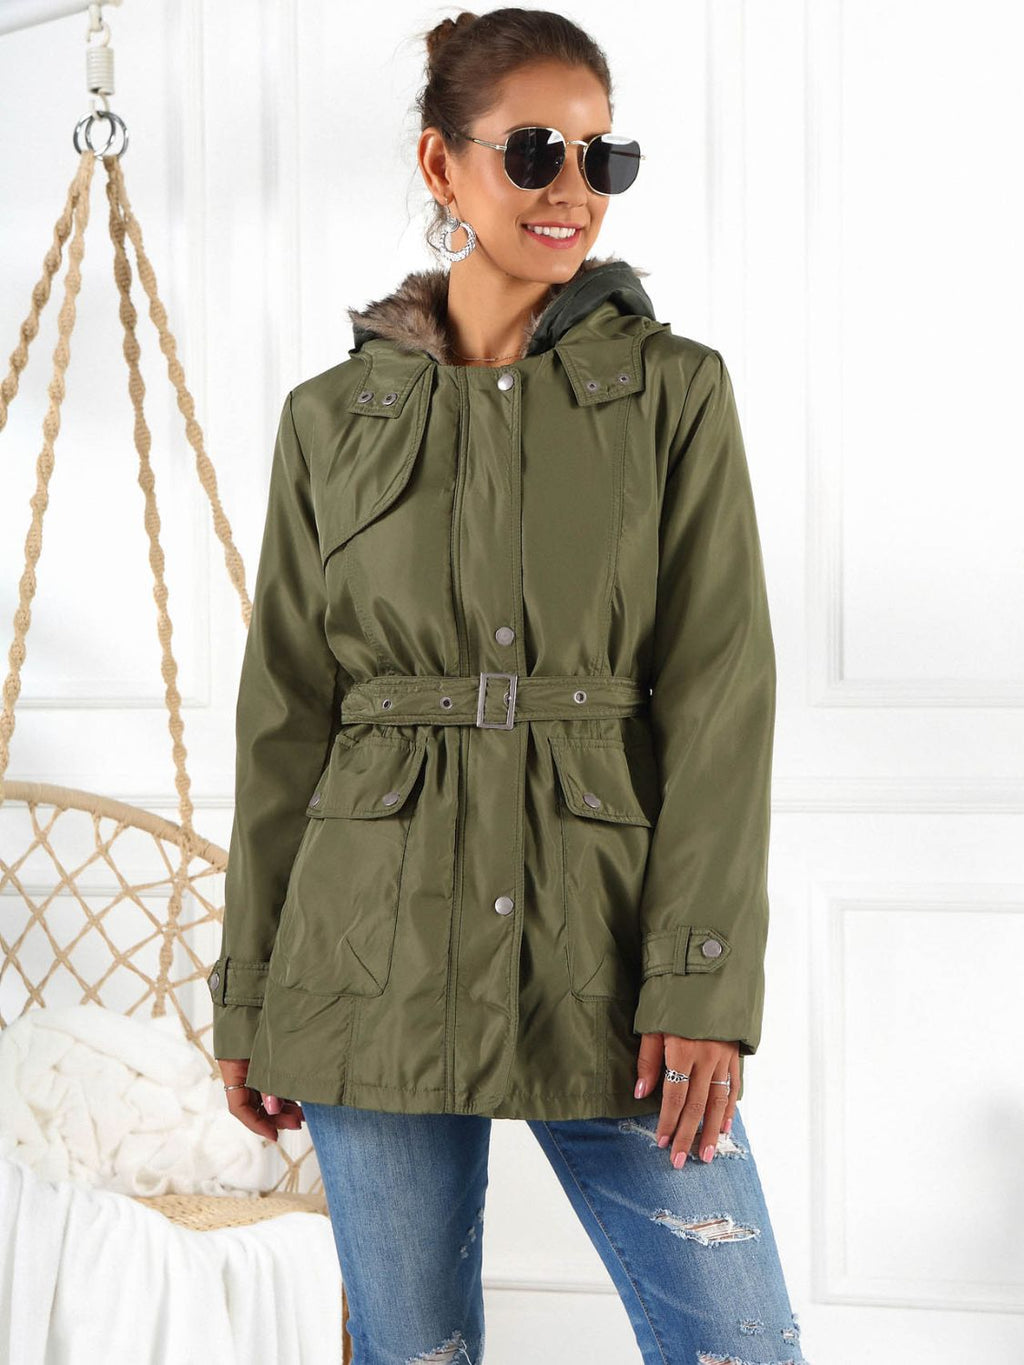 Jerry's Apparel Women Jackets Army Green / S Full Size Hooded Jacket with Detachable Liner (Three-Way Wear)